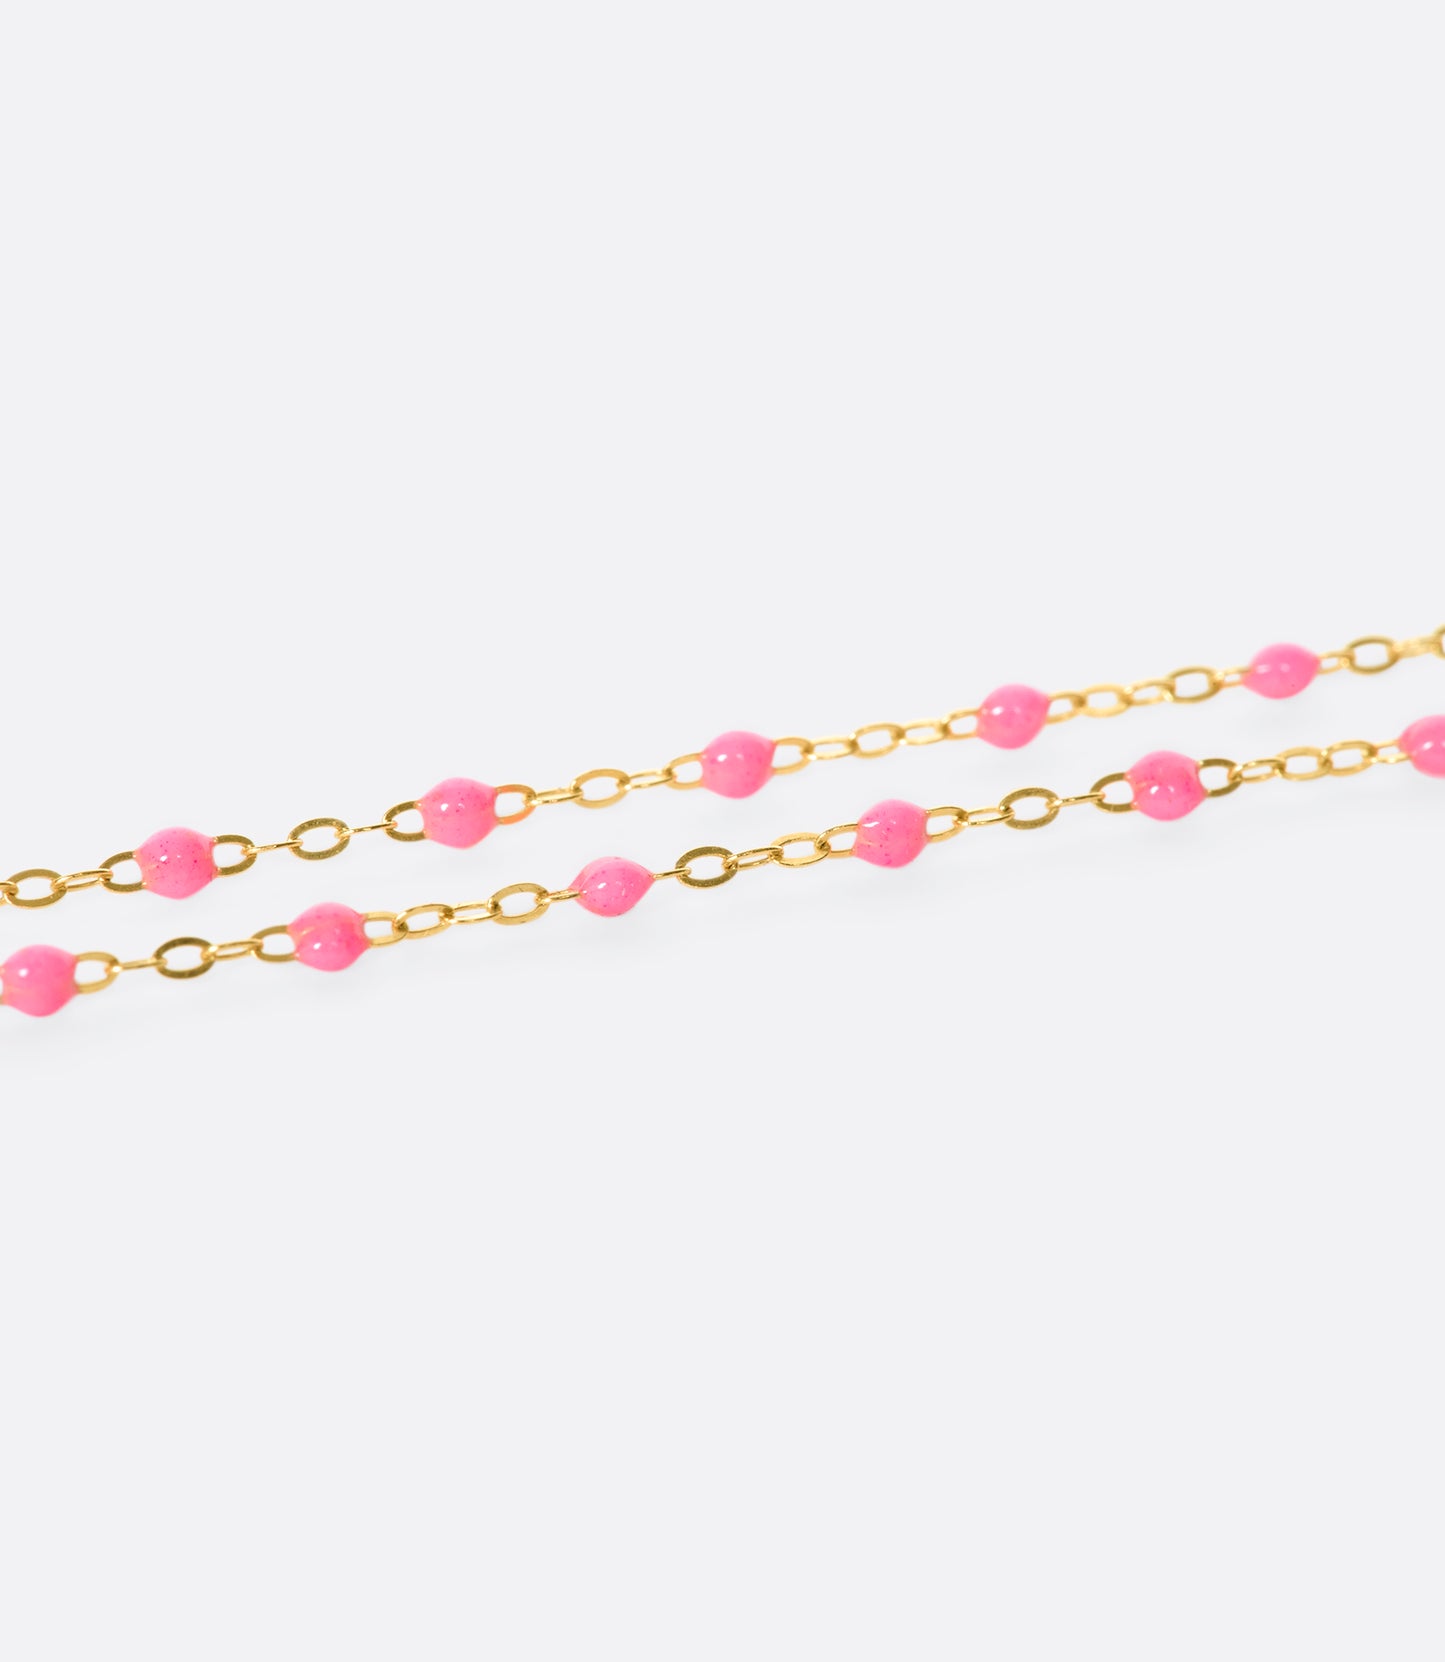 A thin rose gold chain necklace with resin beads. Each necklace is hand dipped in melted resin to create the beaded effect. 